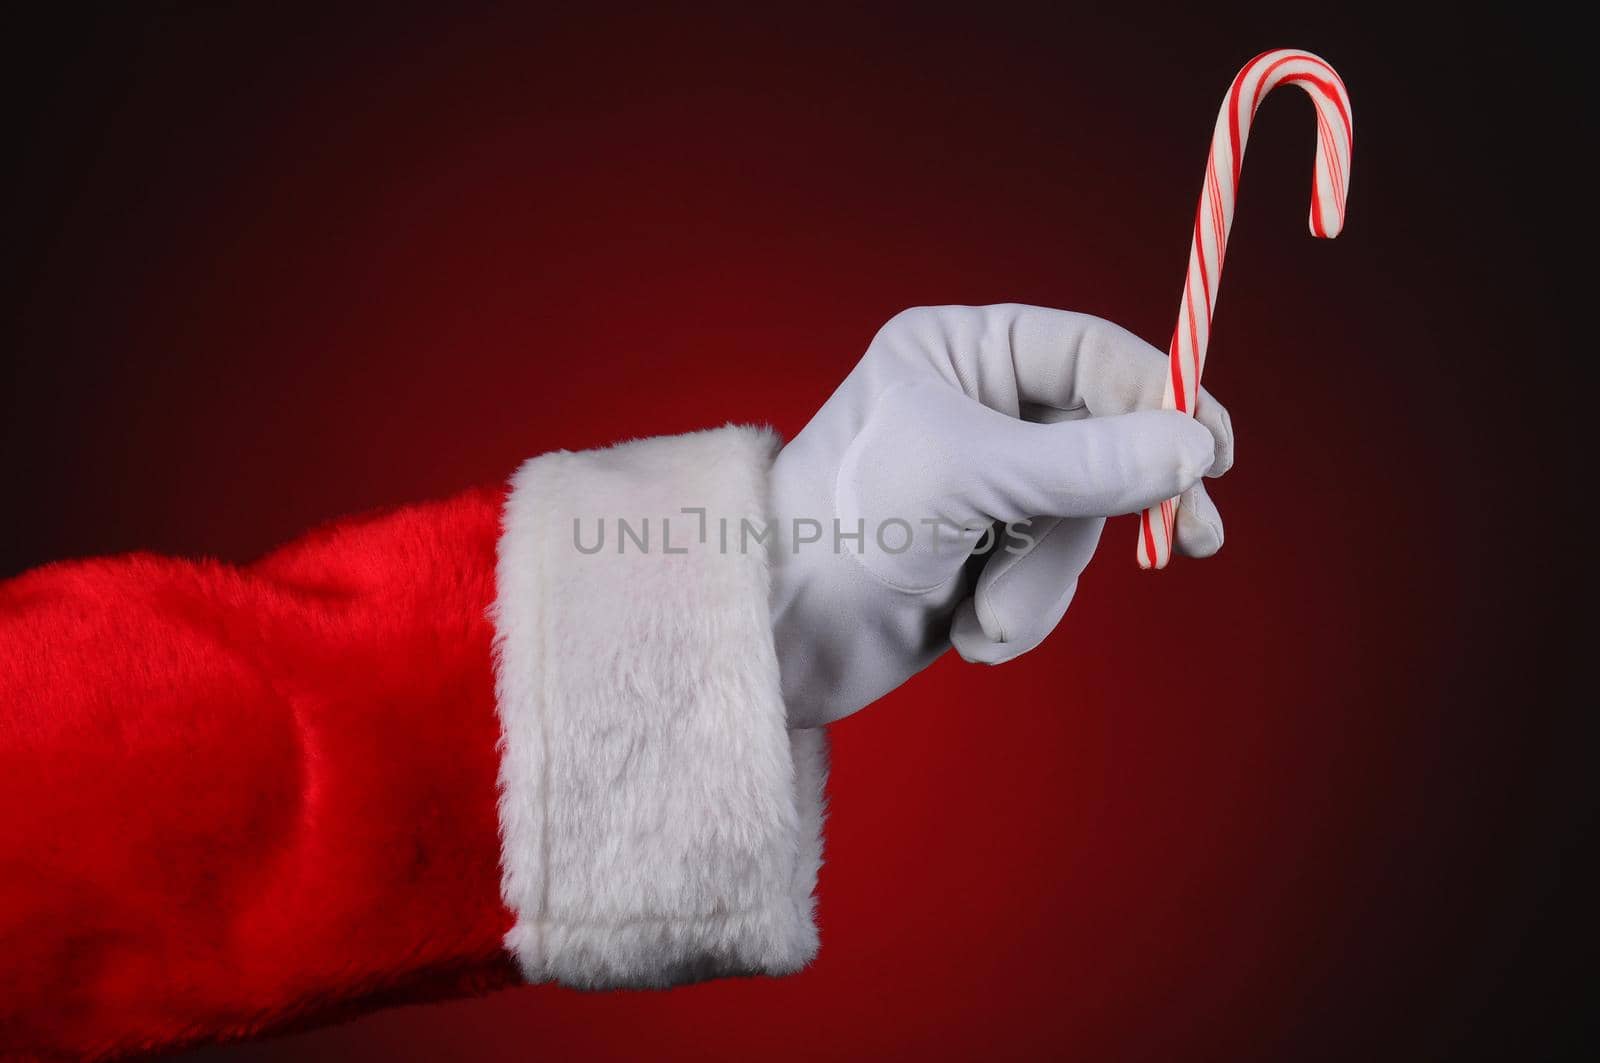 Santa Claus hand holding a candy cane over a red light to dark background. Horizontal format showing hand and arm only.